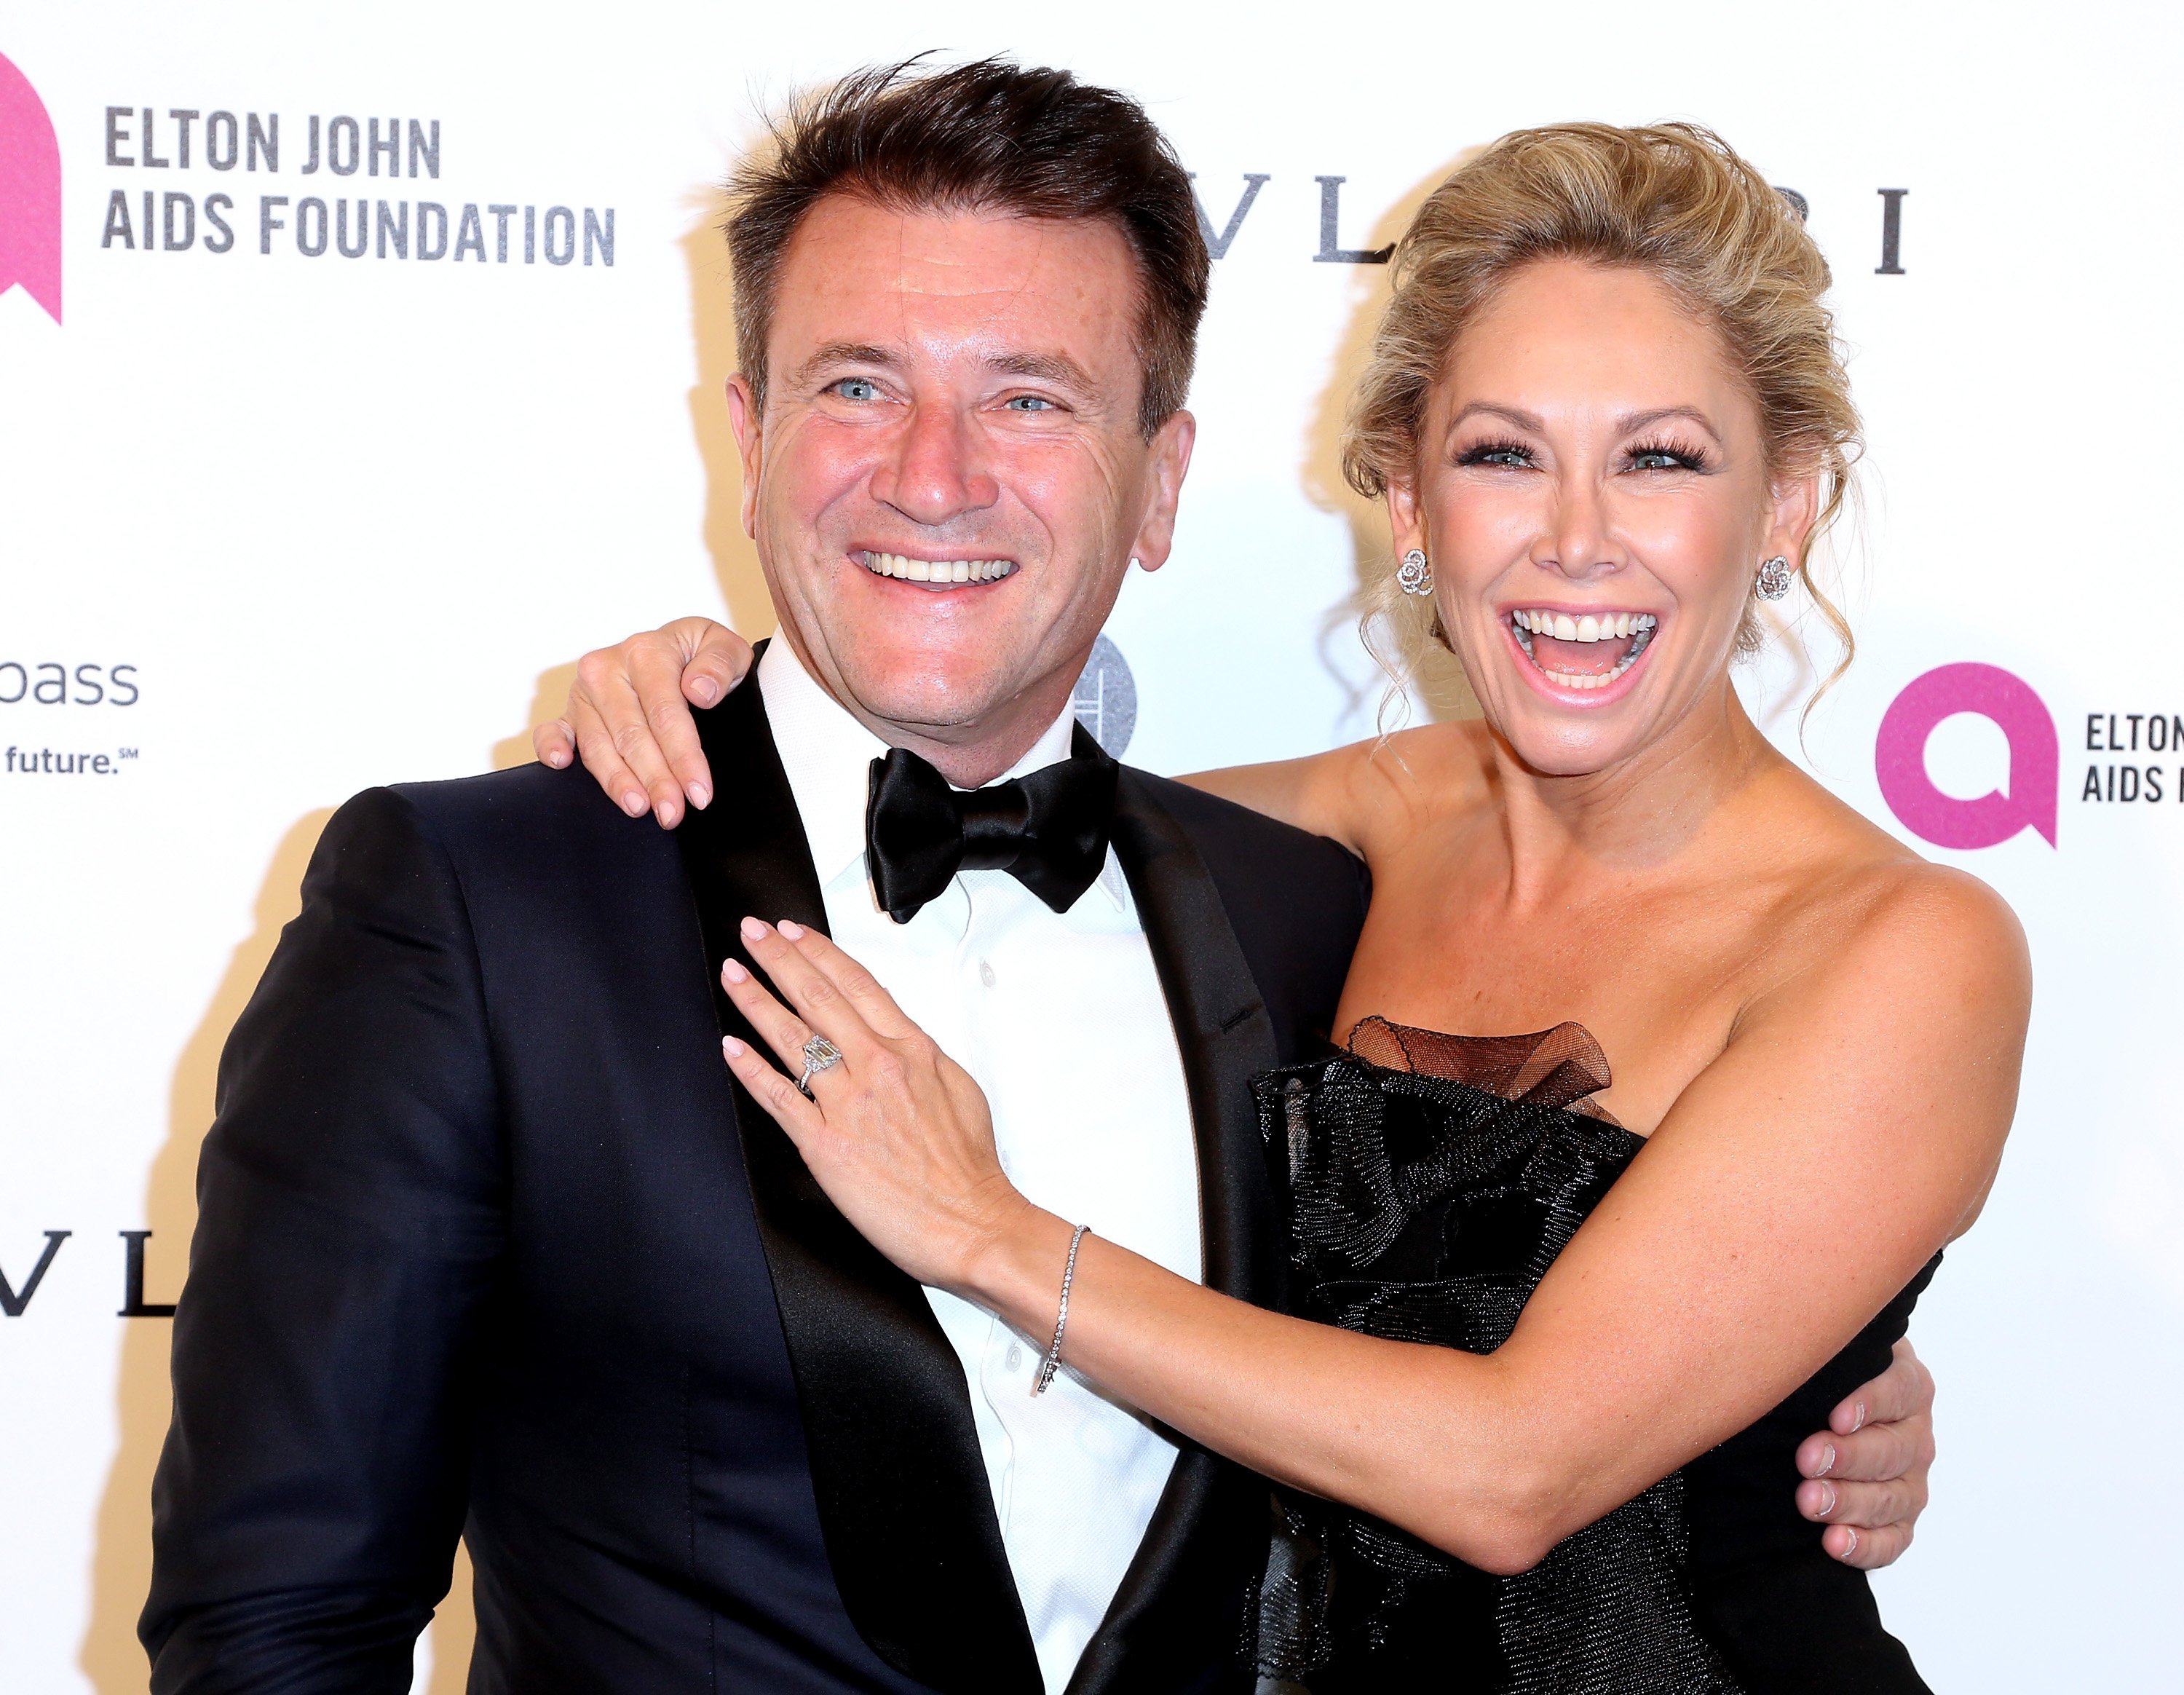 Kym Johnson and Robert Herjavec attend the 24th Annual Elton John AIDS Foundation's Oscar Viewing Party in West Hollywood on February 28, 2016. | Photo: Getty Images